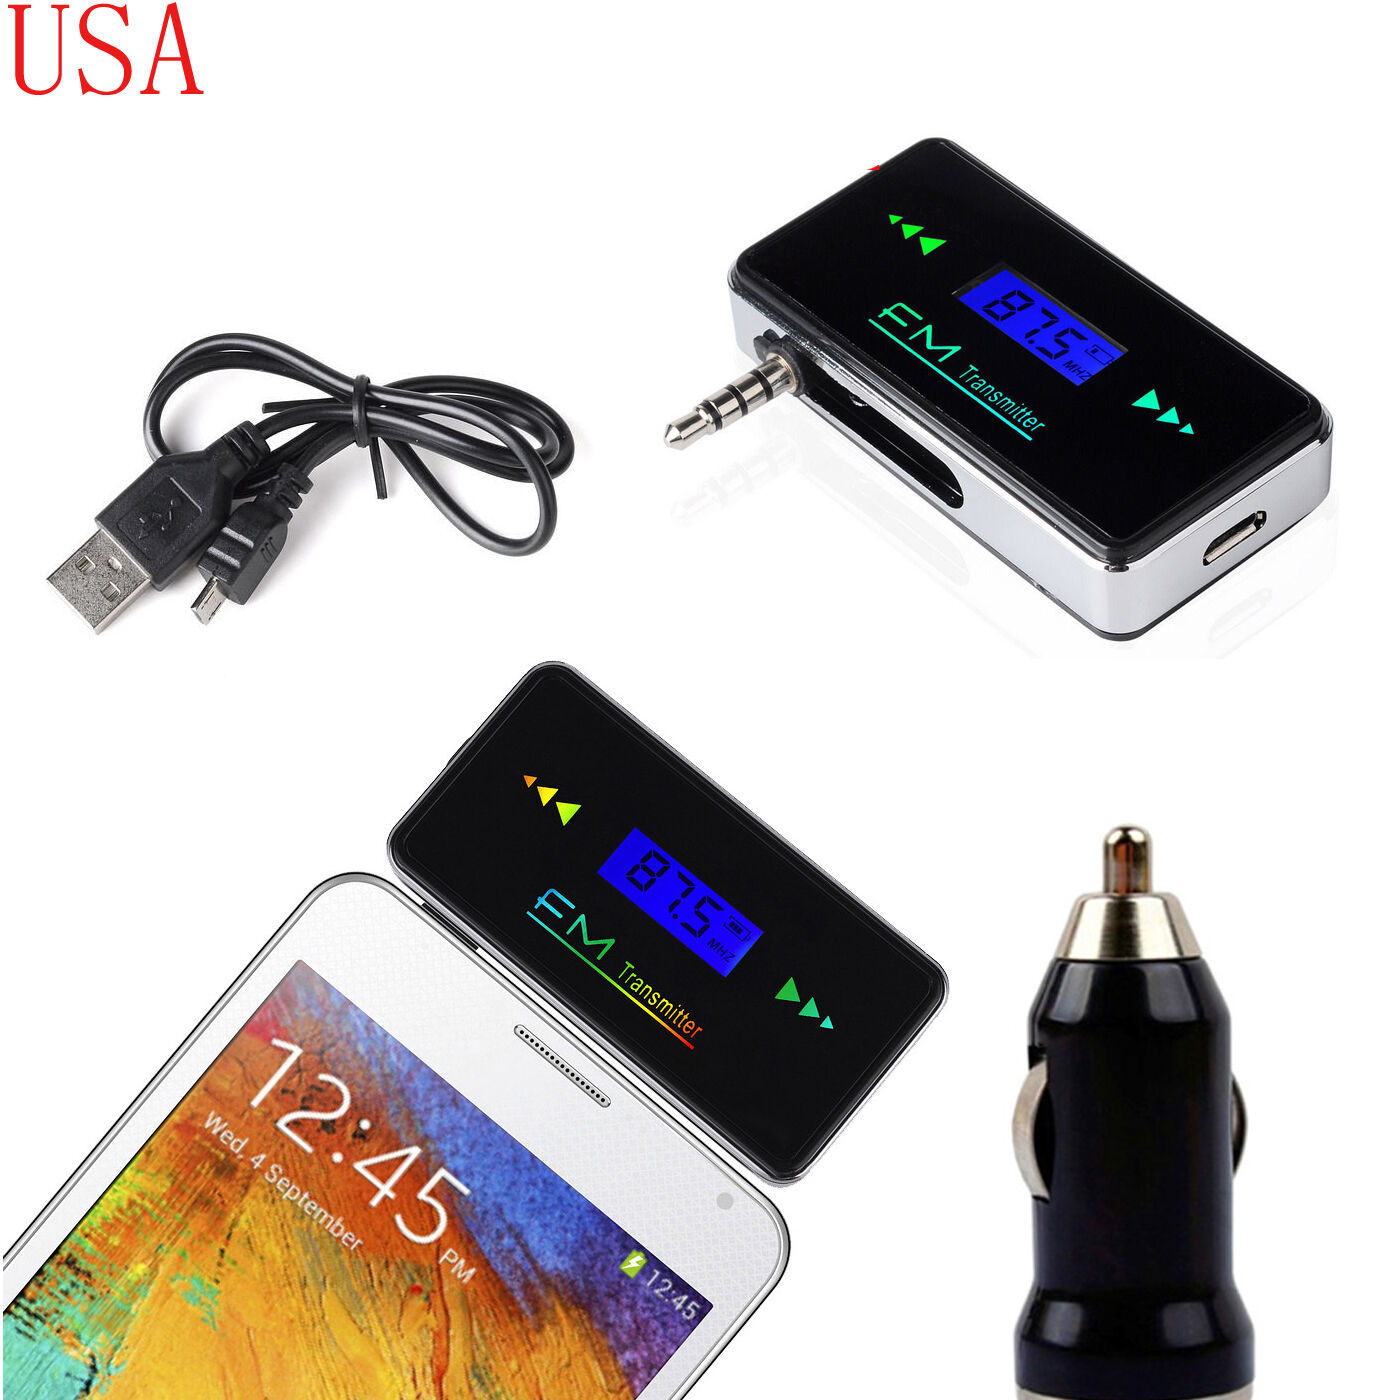 LCD 3.5mm In-car Handsfree FM Transmitter w/ Car Charger Fr Samsung Galaxy S4 S5 - $25.99